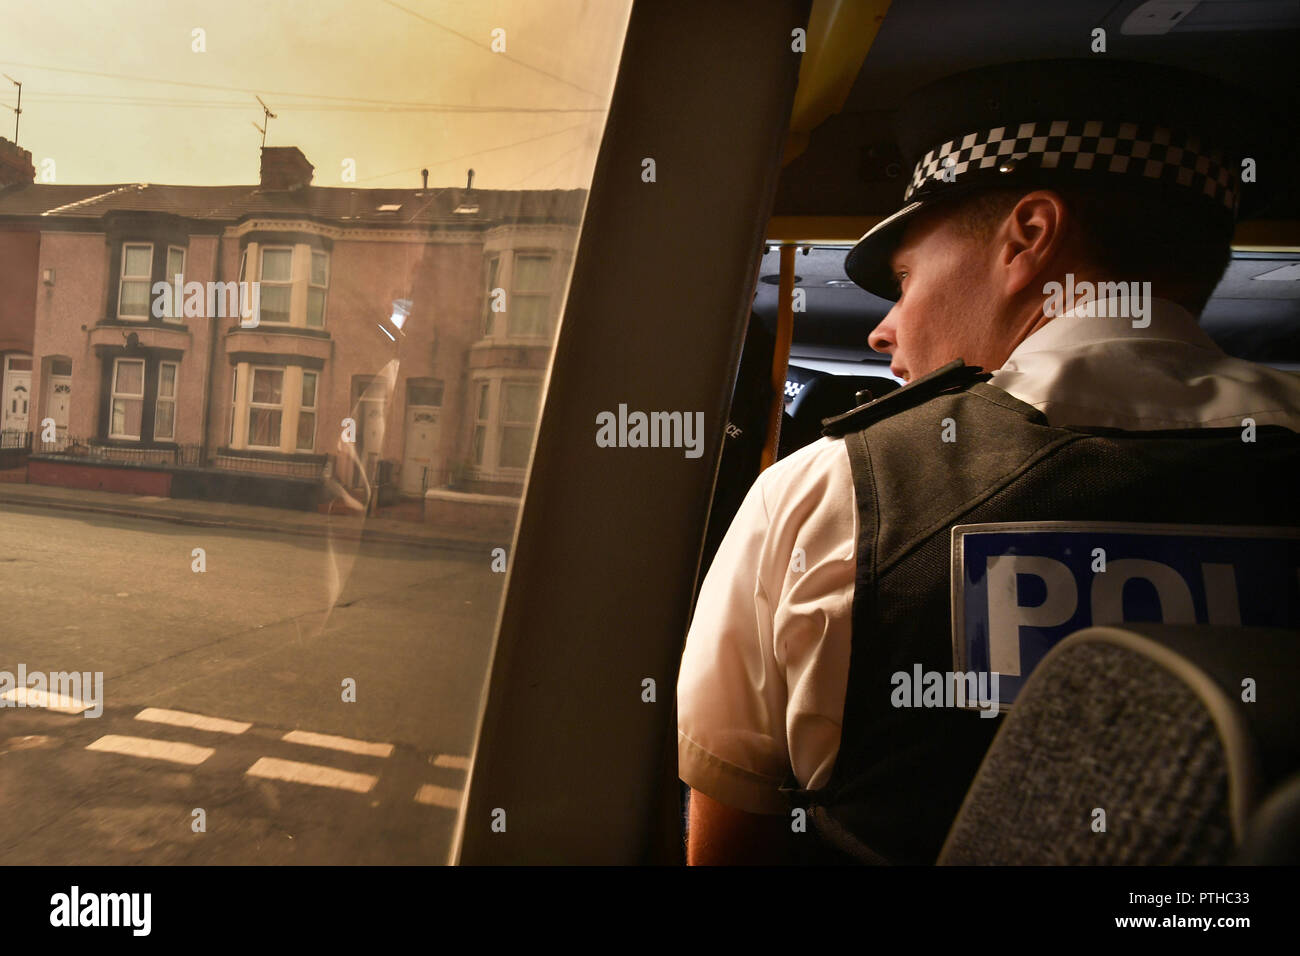 Superintendent Matt Boyle looks out of a patrol van window as Merseyside Police officers carry out Stop and Searches in the Bootle area of Liverpool   Stock Photo